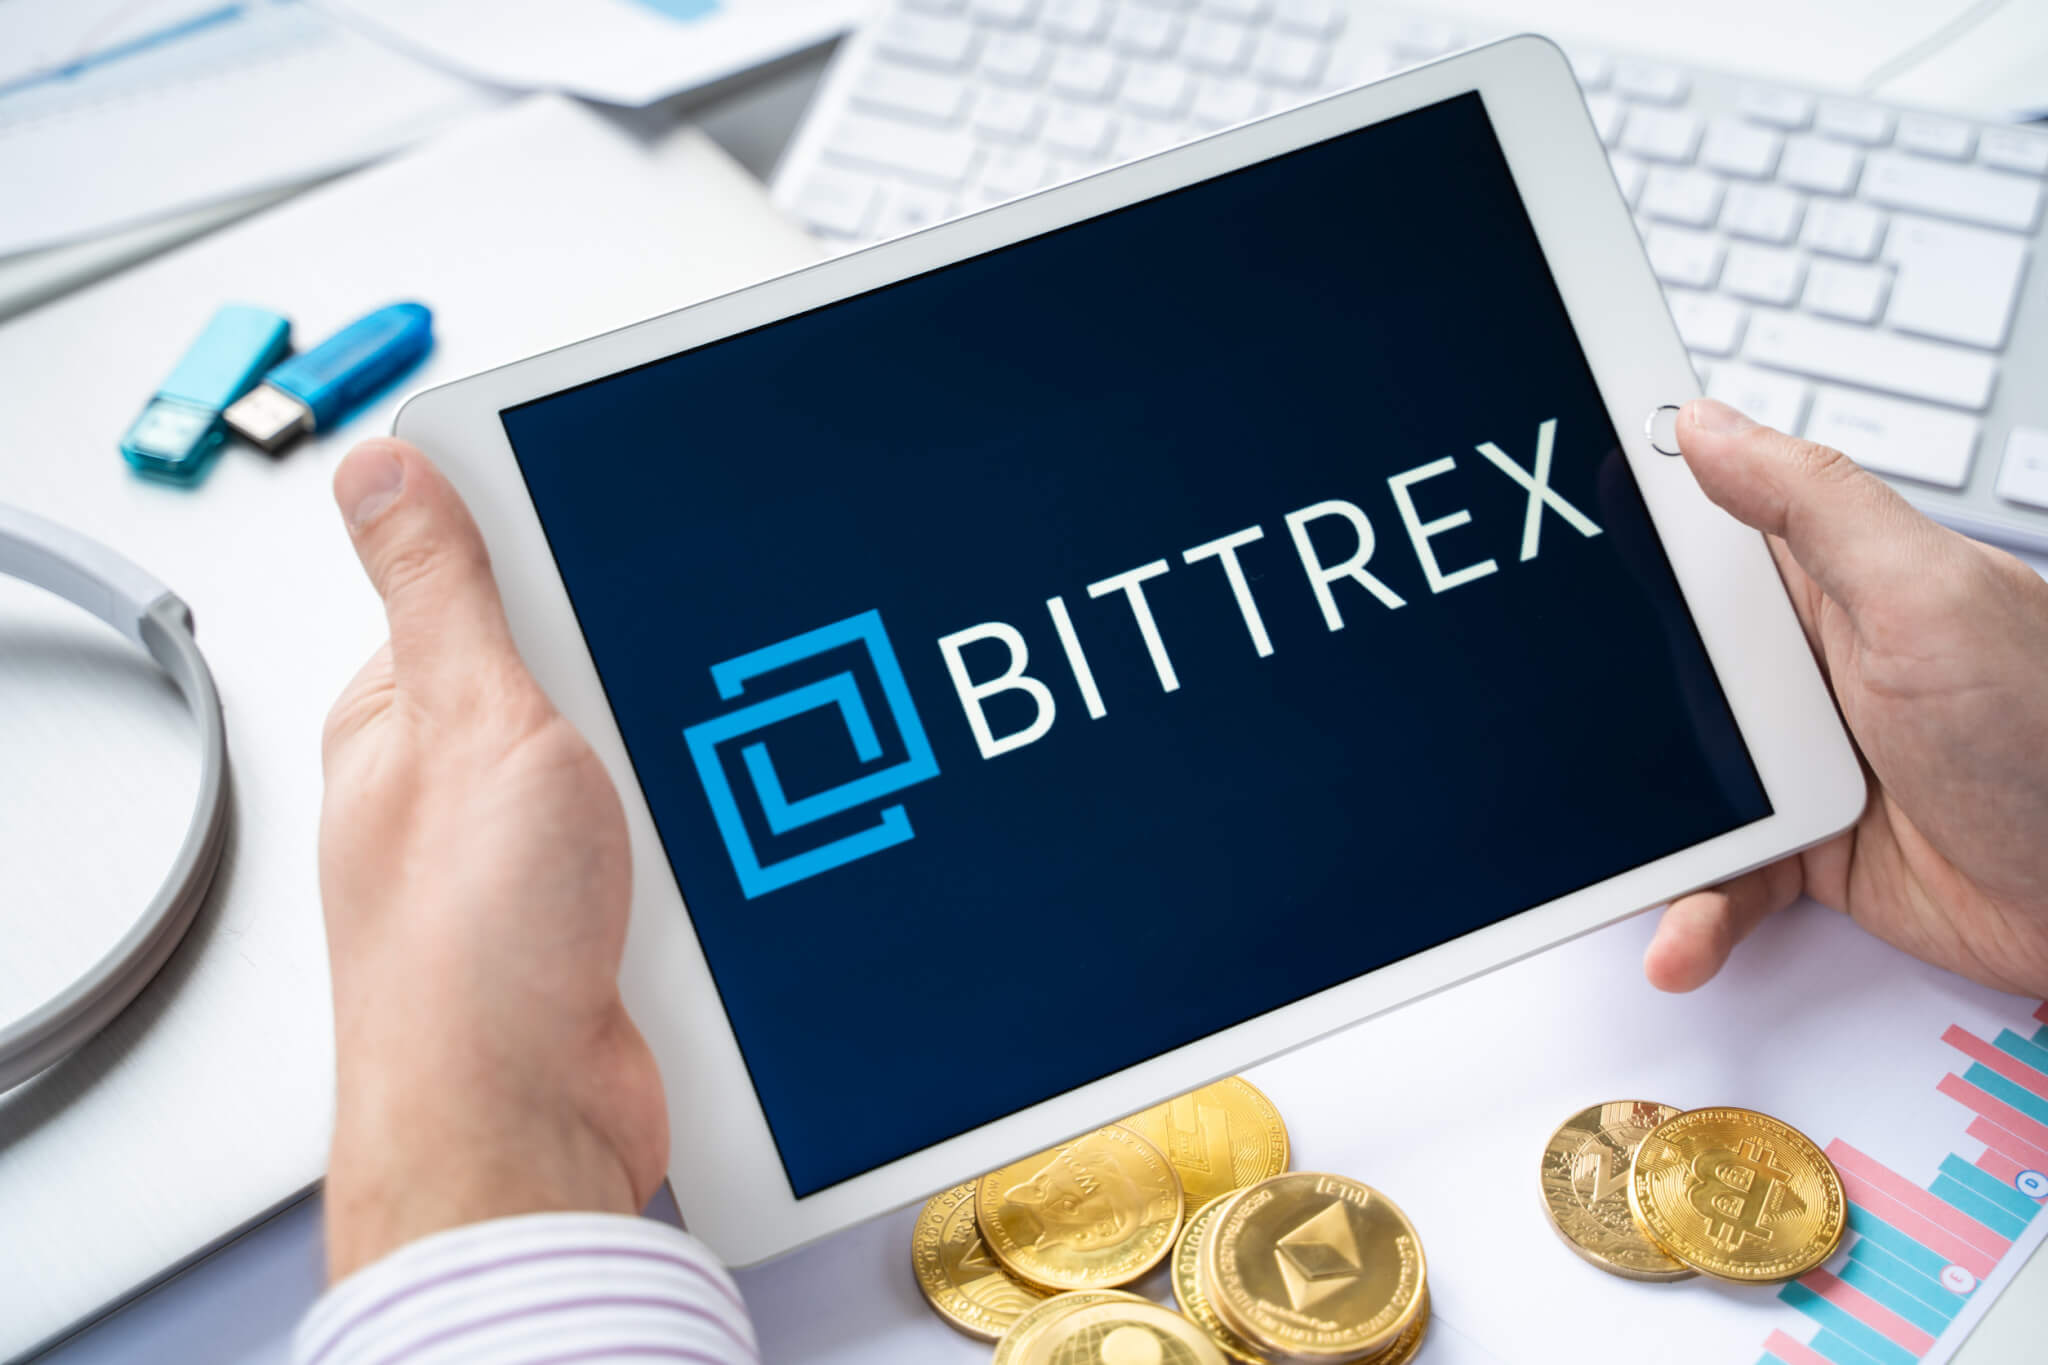 bittrex to exit the u.s.